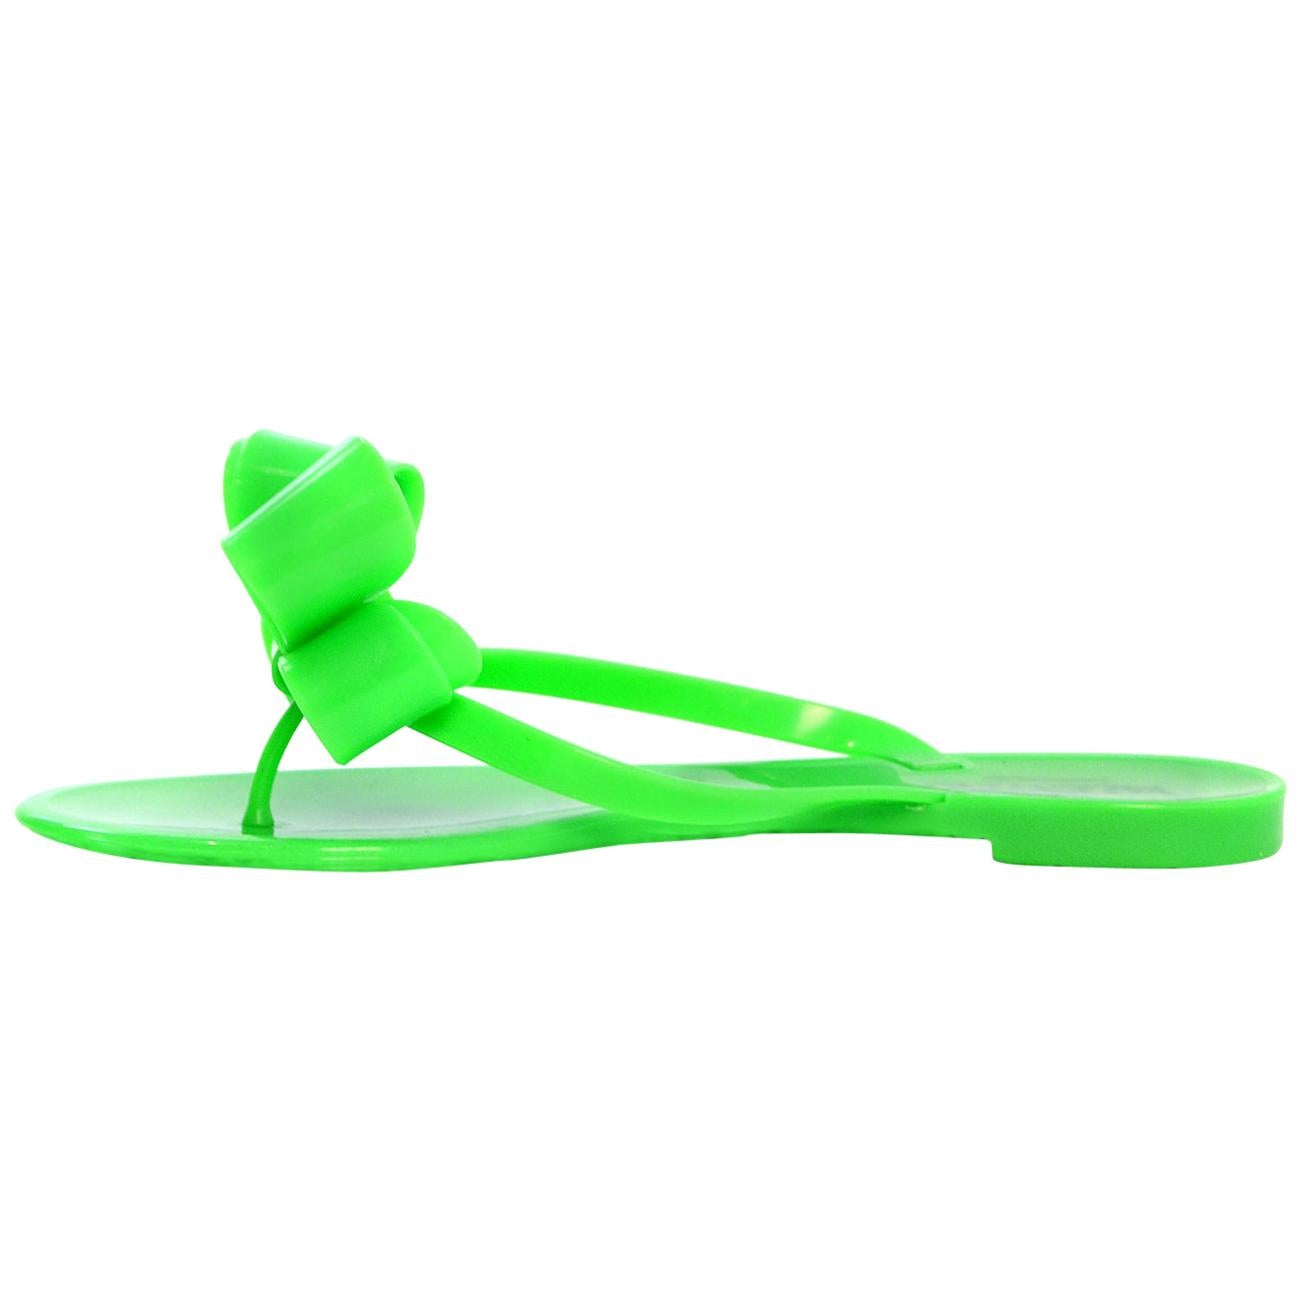 Valentino Green Rubber Jelly Couture Bow Thong Sandals sz 39 rt $295